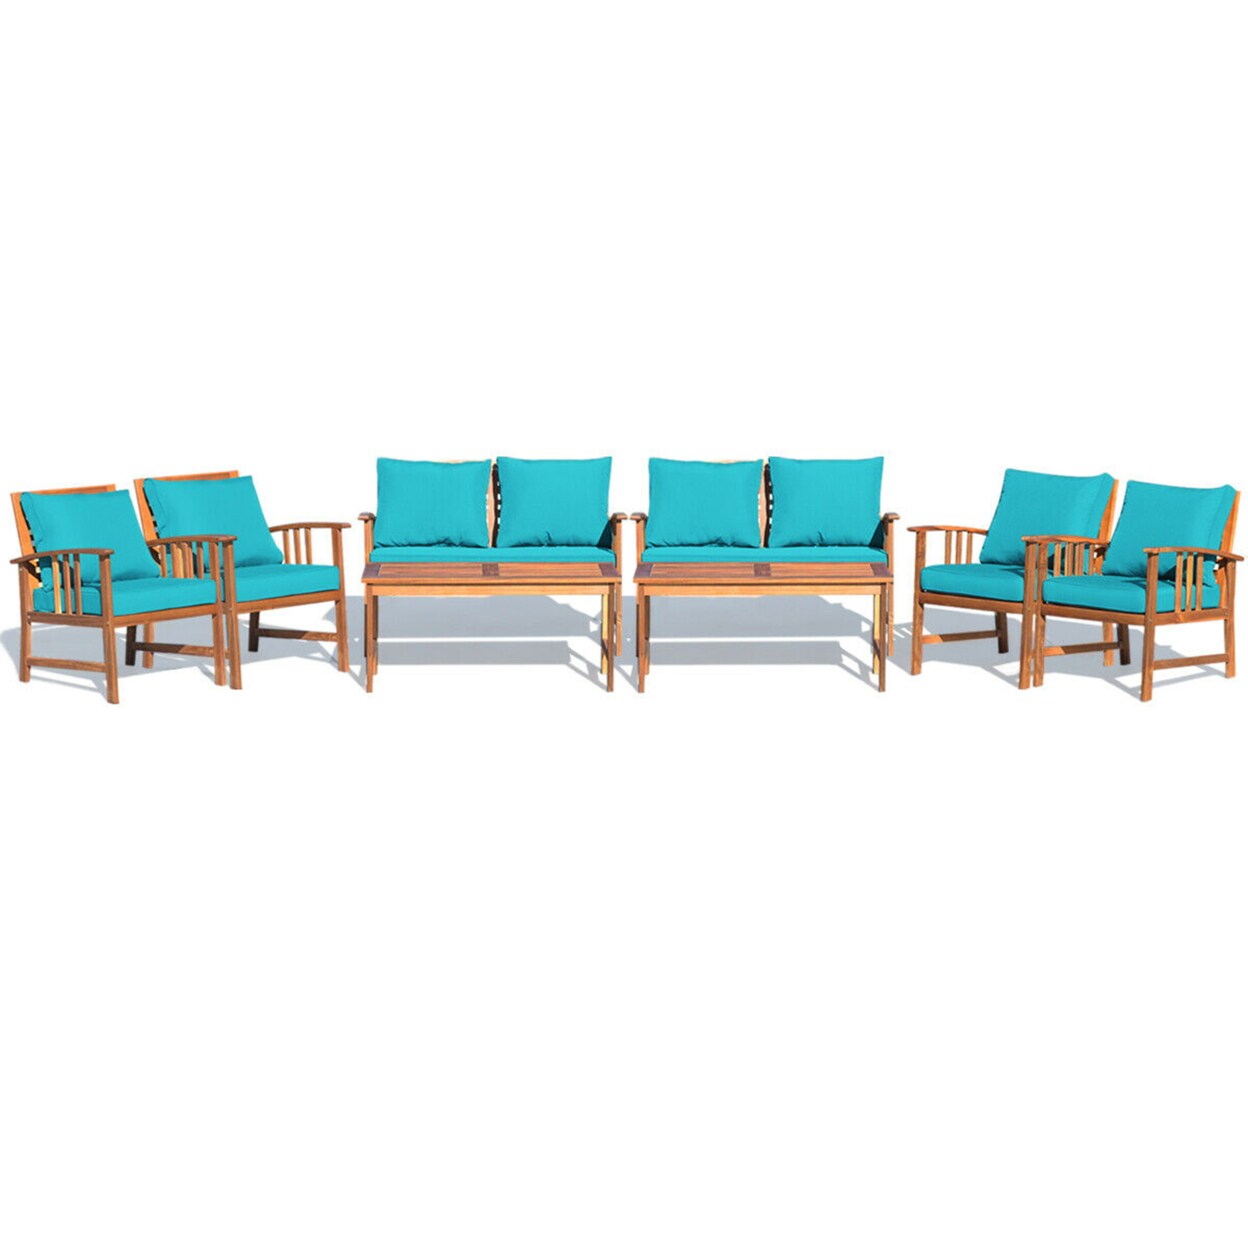 Gymax 8pcs Wooden Patio Furniture Set Table and Sectional Sofa w/ Turquoise Cushion